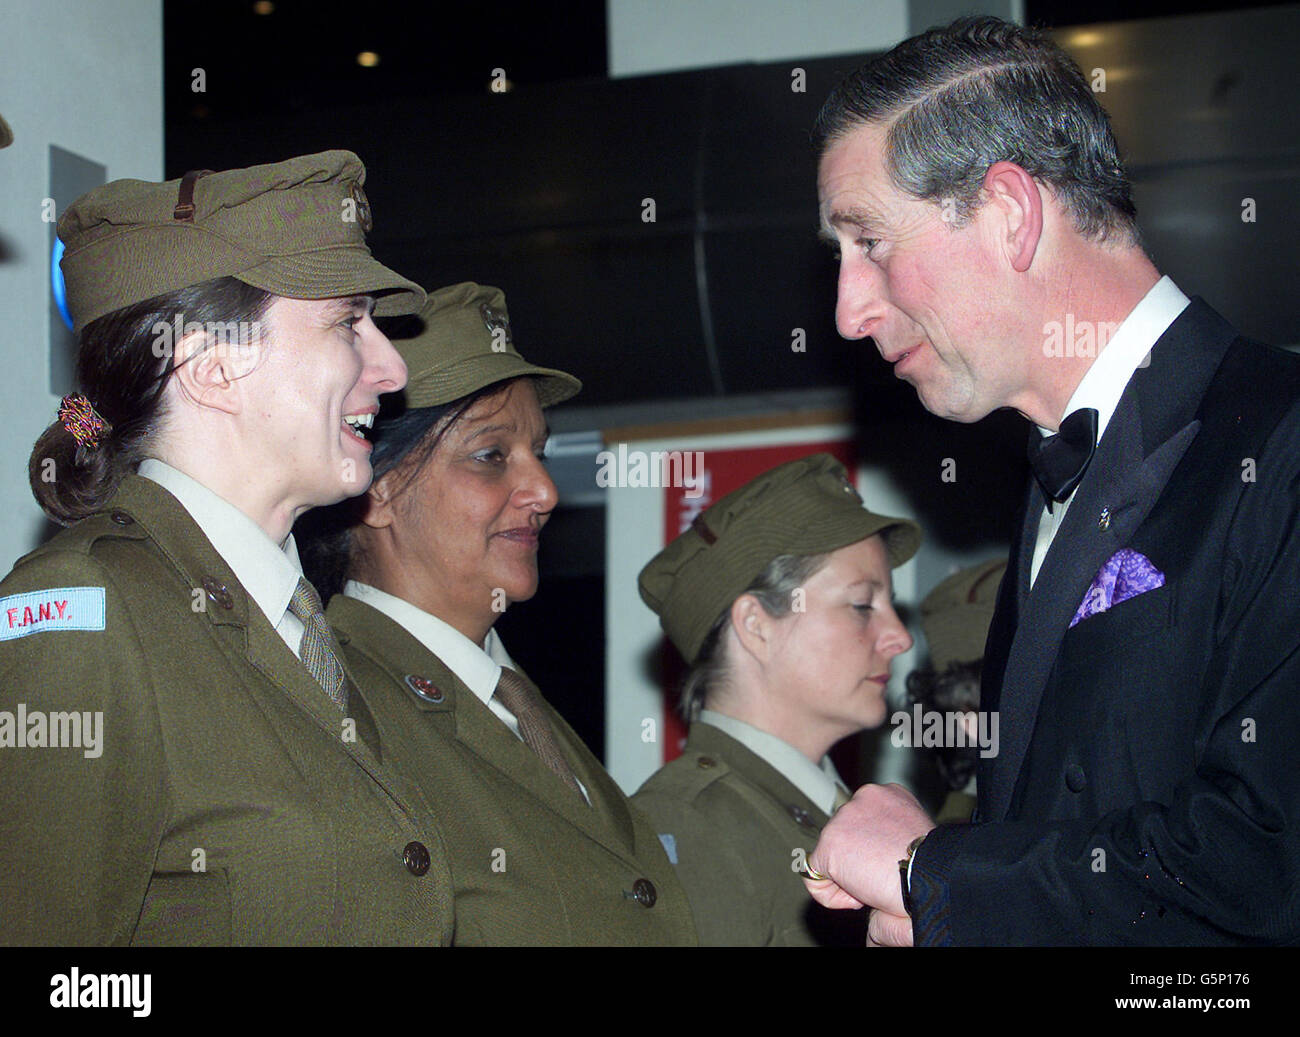 The Prince of Wales meets members of the First Aid Nursing Yeomanry (FANY) at the film premiere of 'Charlotte Gray' at the Odeon Cinema in London's Leicester Square. Stock Photo